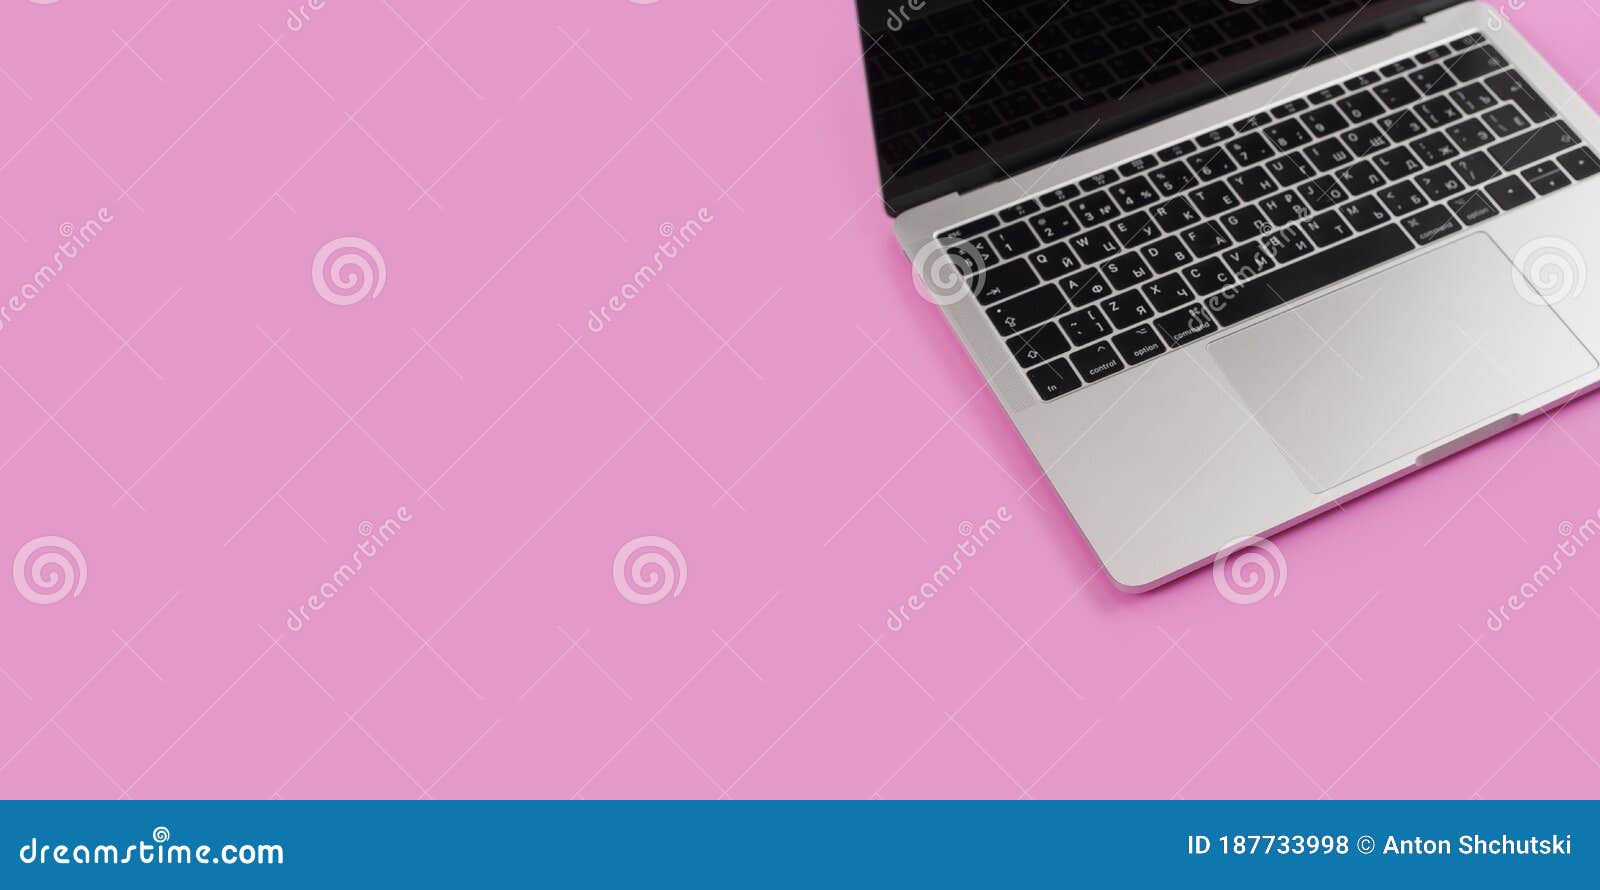 Laptop Workspace Pink Background Office High Angle View Colored Desk Copy Space Table Supplies Top 187733998 